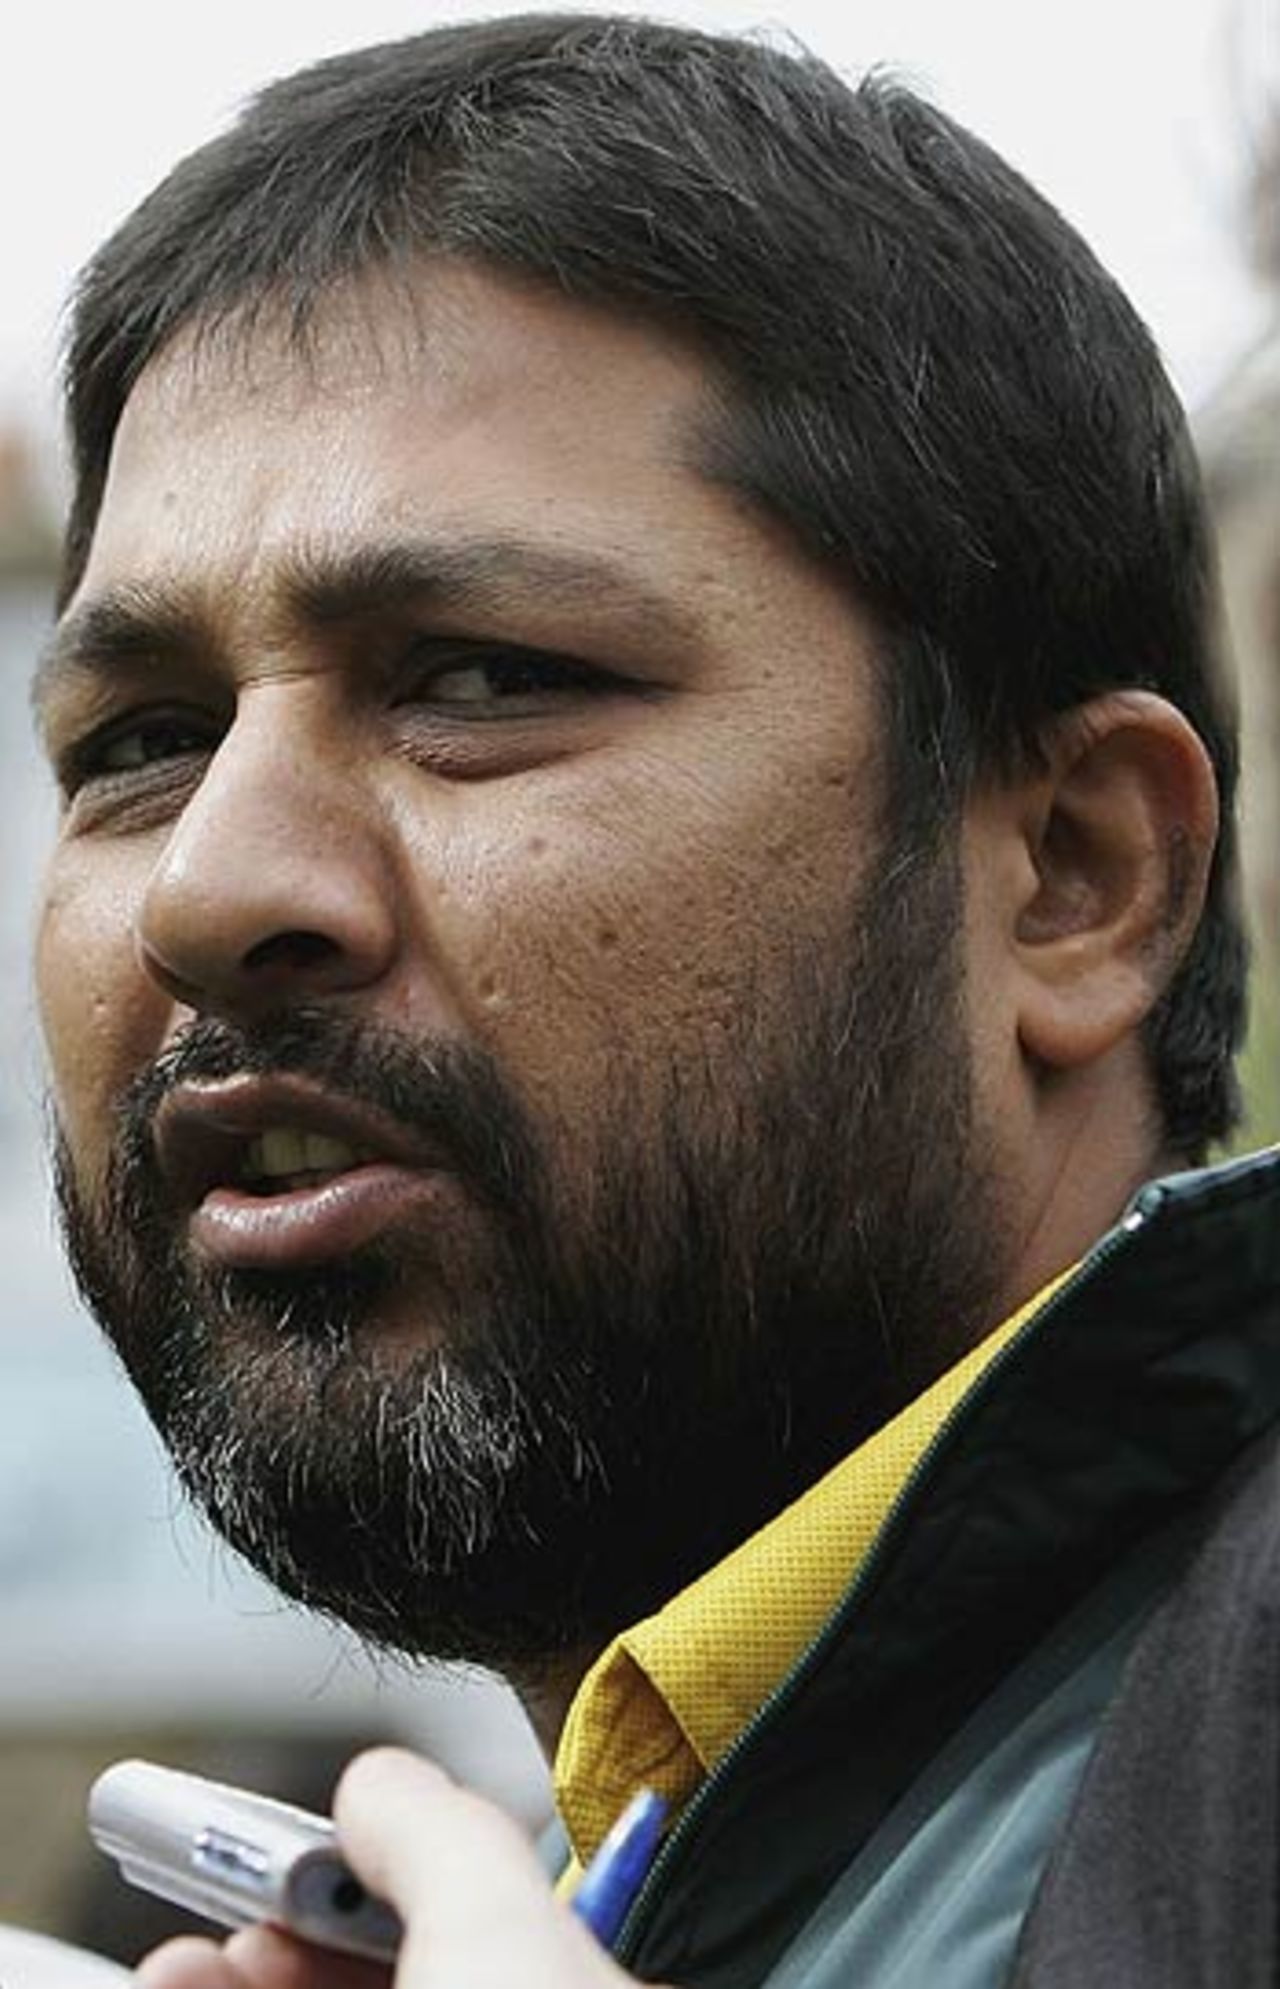 Inzamam-ul-Haq speaks to the media, England v Pakistan, 4th Test, The Oval, August 21, 2006